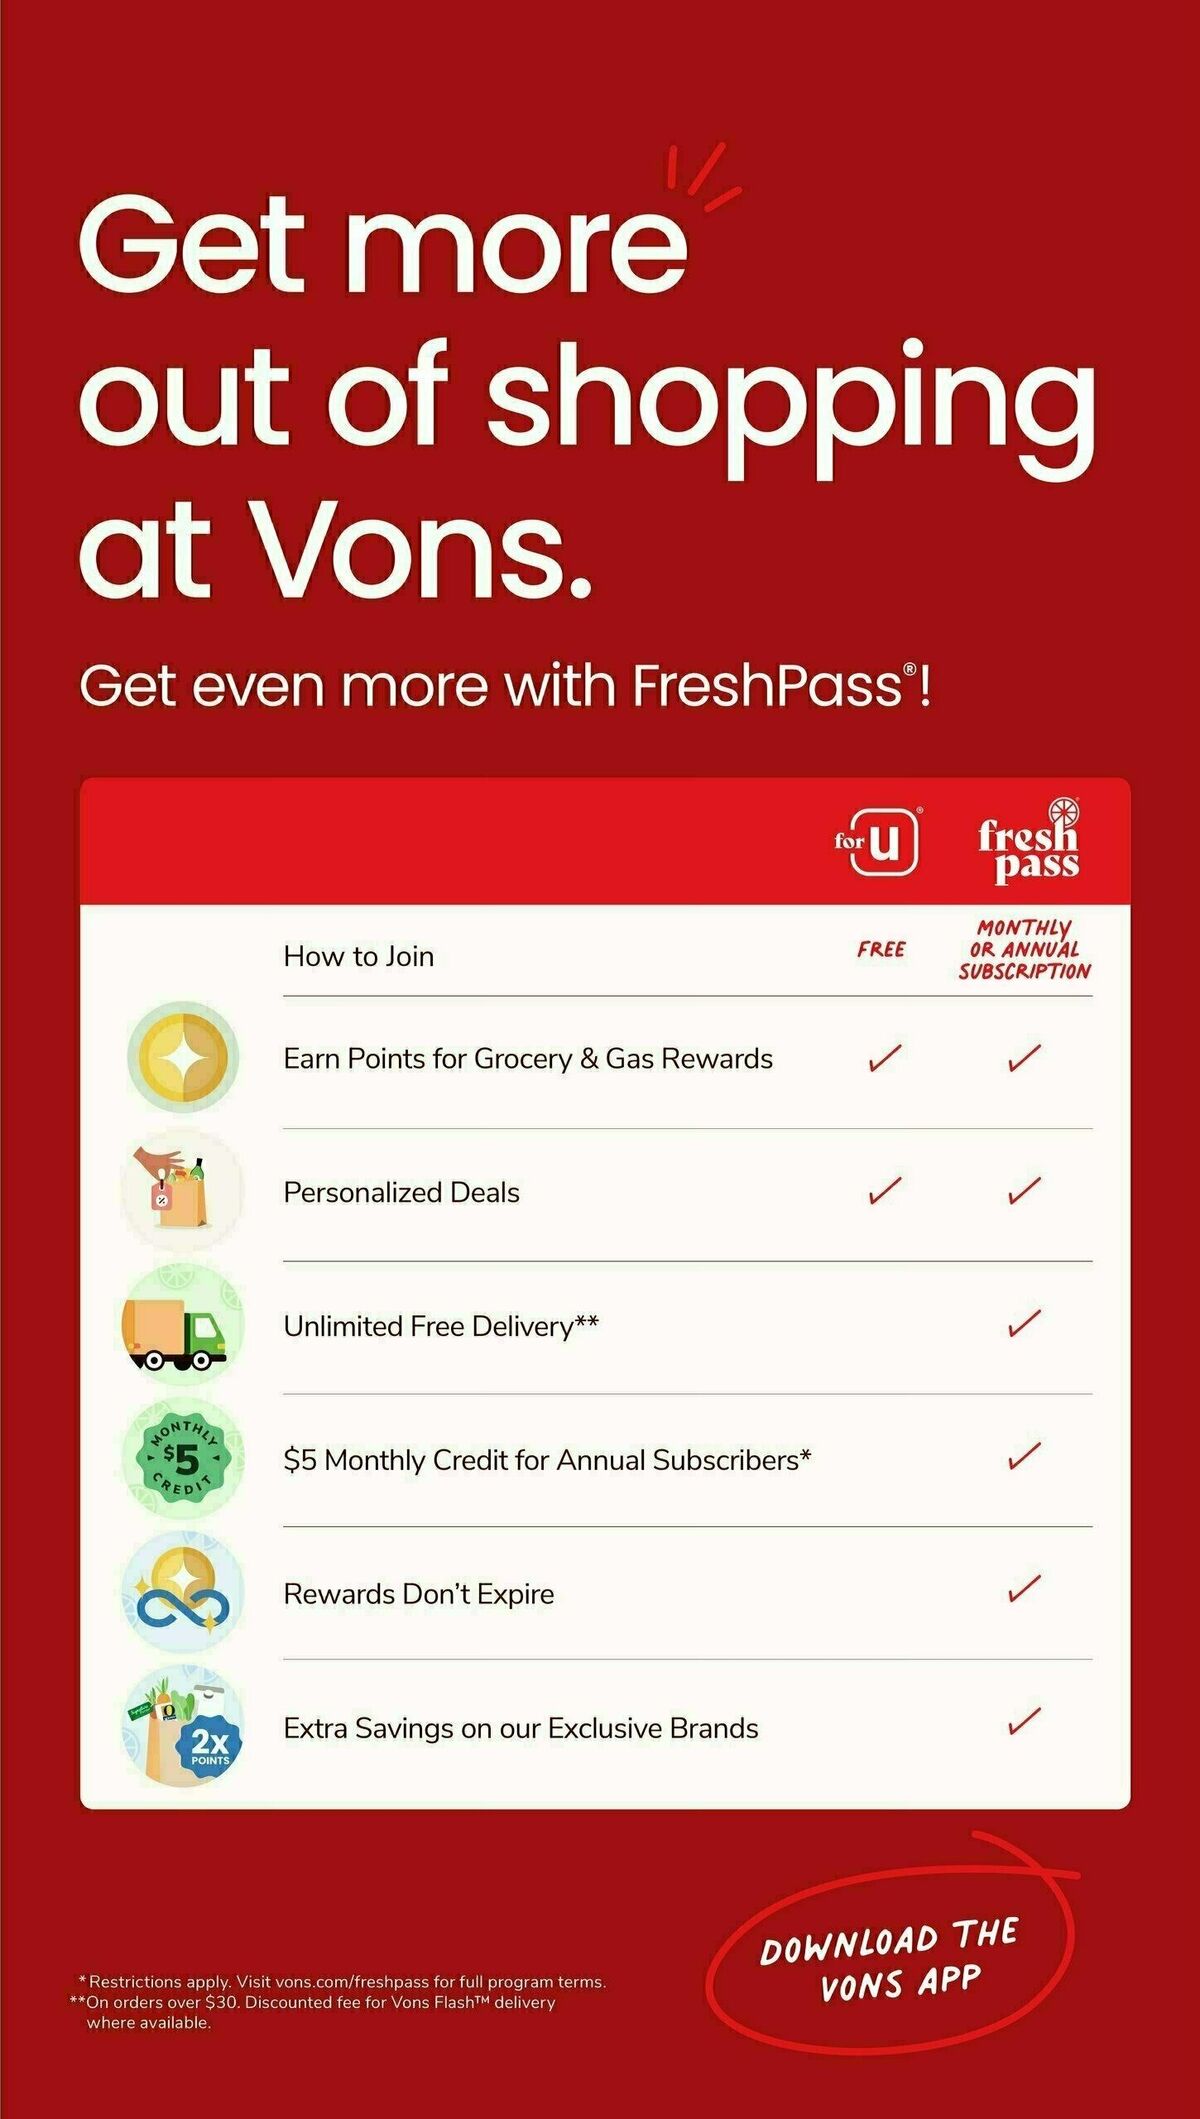 Vons Weekly Ad from August 2